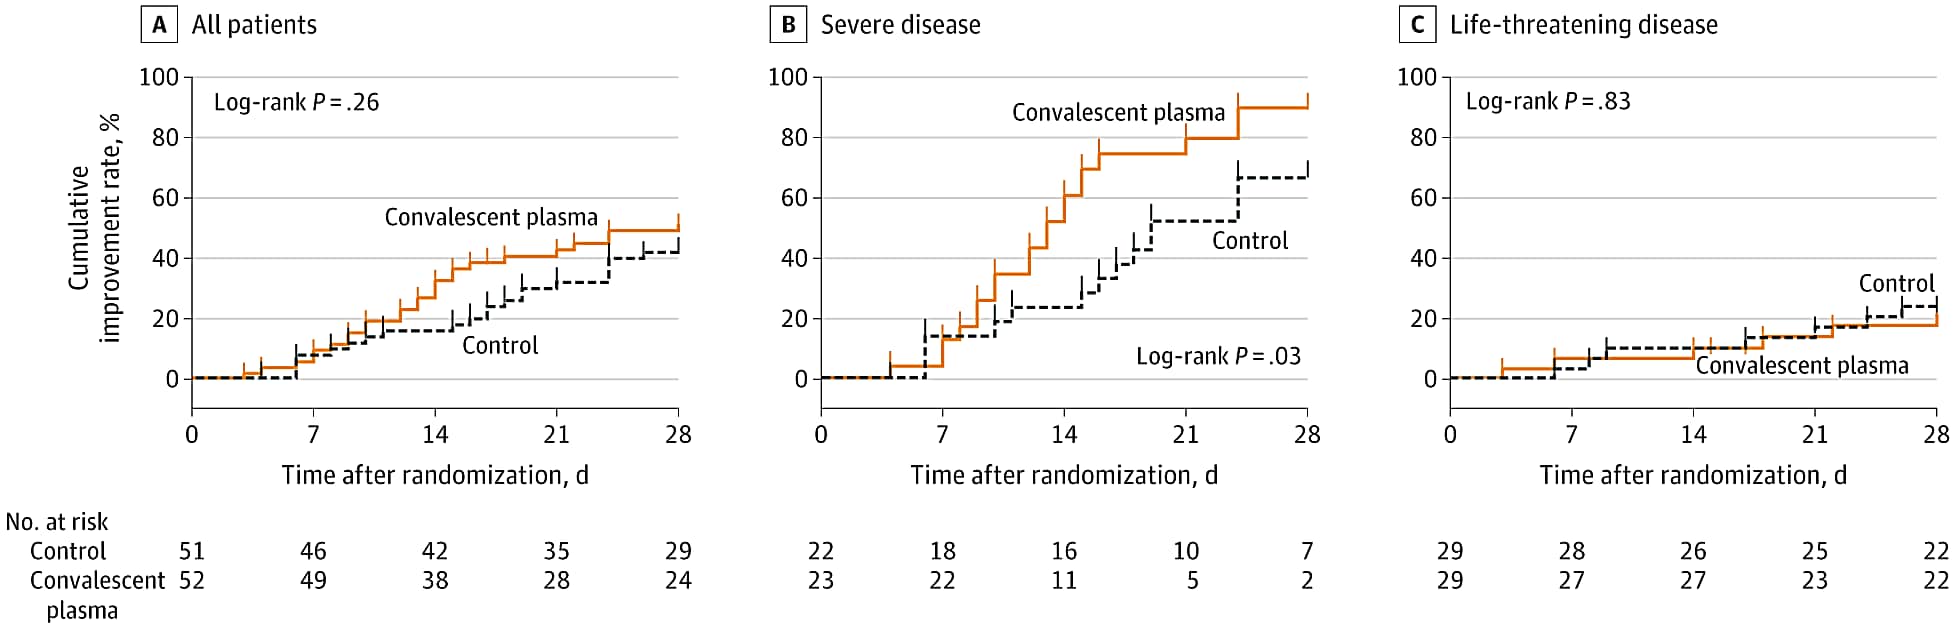 Rate of cumulative clinical improvement over time for all patients (A), those with severe disease (B) and those with life-threatening disease (C) for convalescent plasma and control groups.